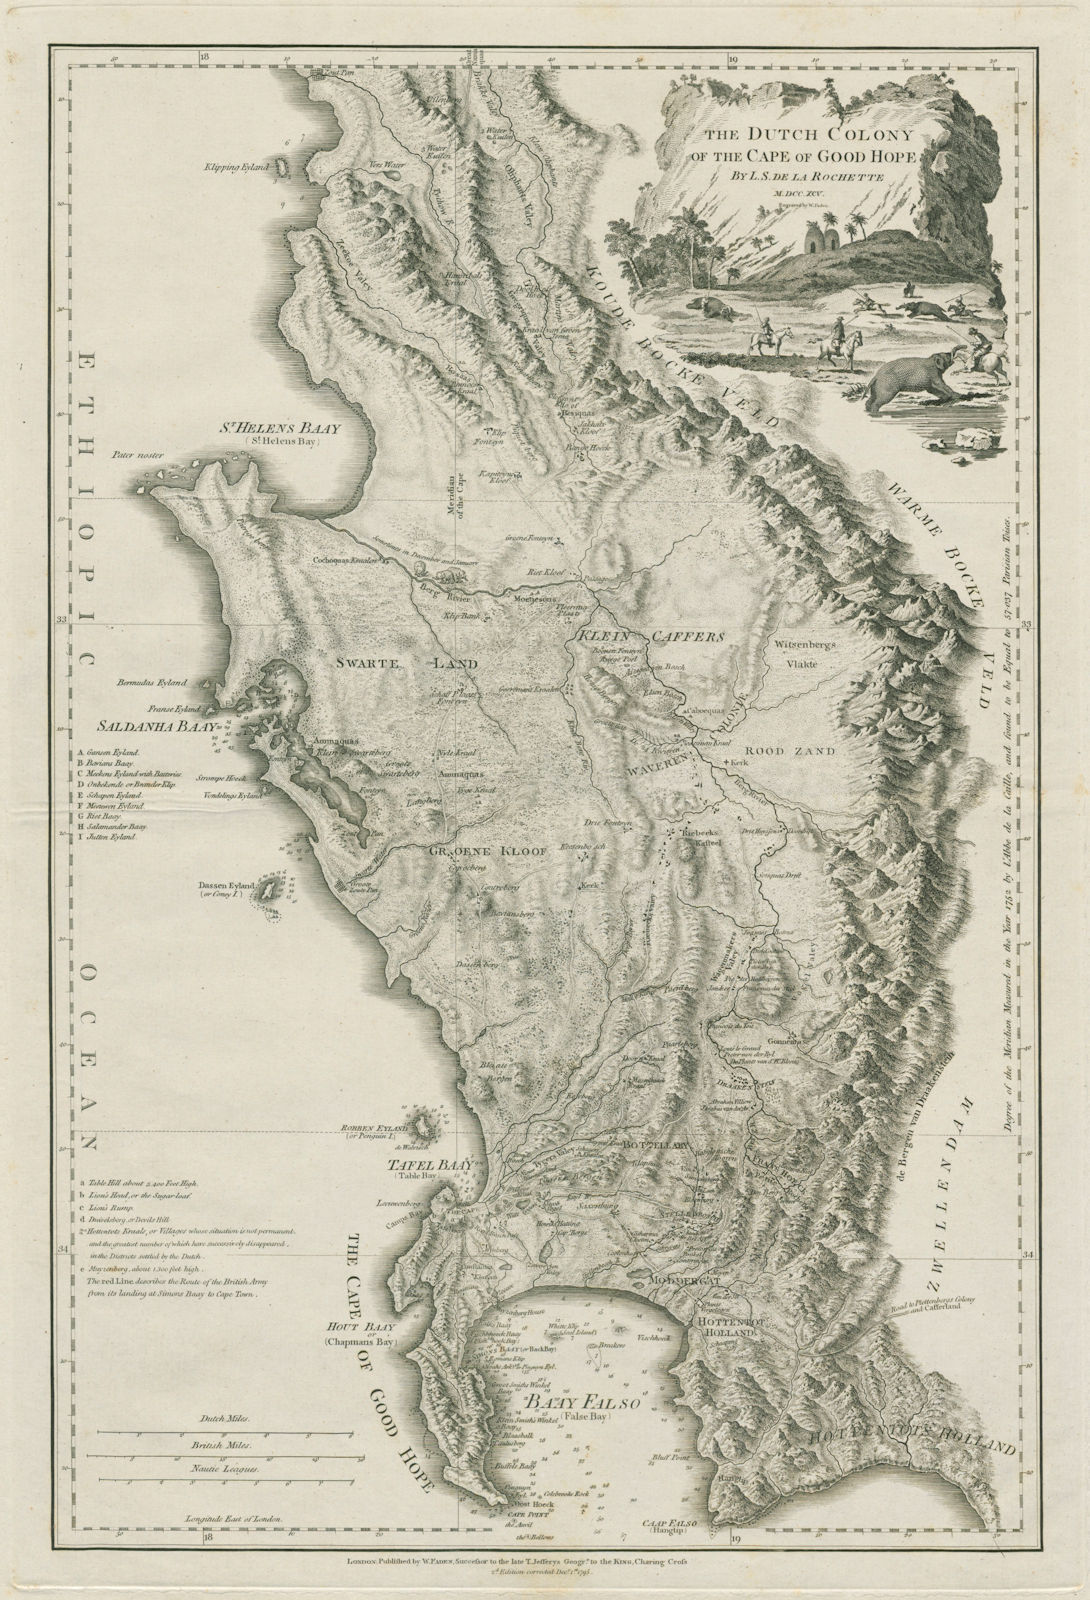 Associate Product The Dutch colony of the Cape of Good Hope. South Africa Cape Town FADEN 1795 map